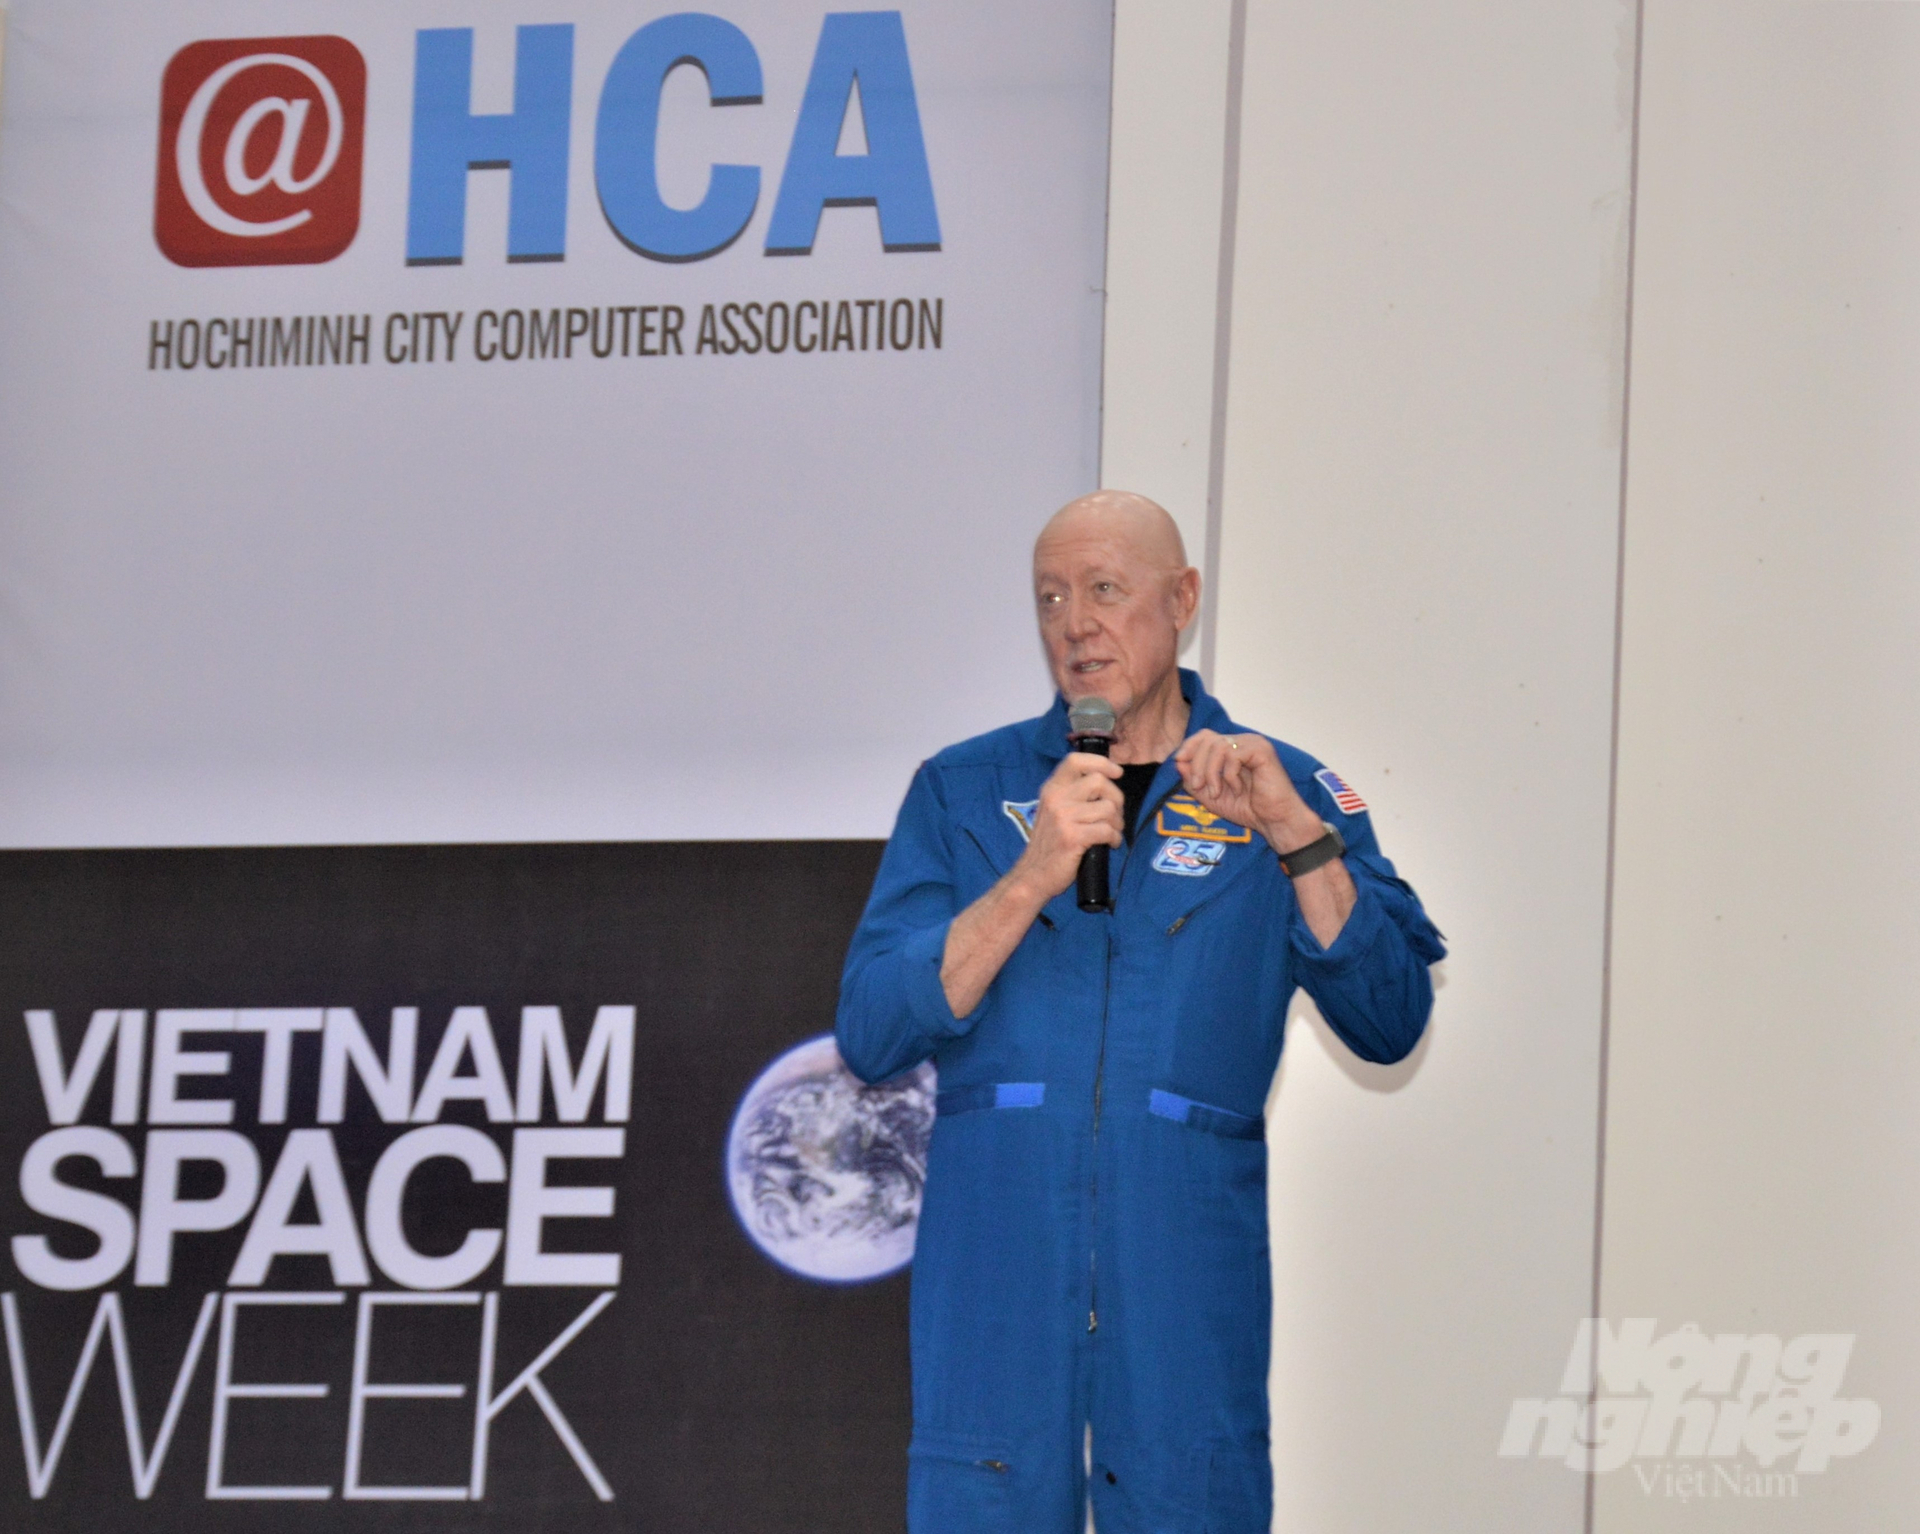 Speaking at the NASA TALK SHOW Program, former astronaut Michael Baker wishes to inspire Vietnamese youth about scientific research activities, which contribute good deeds to humankind. Photo: Trung Chanh.